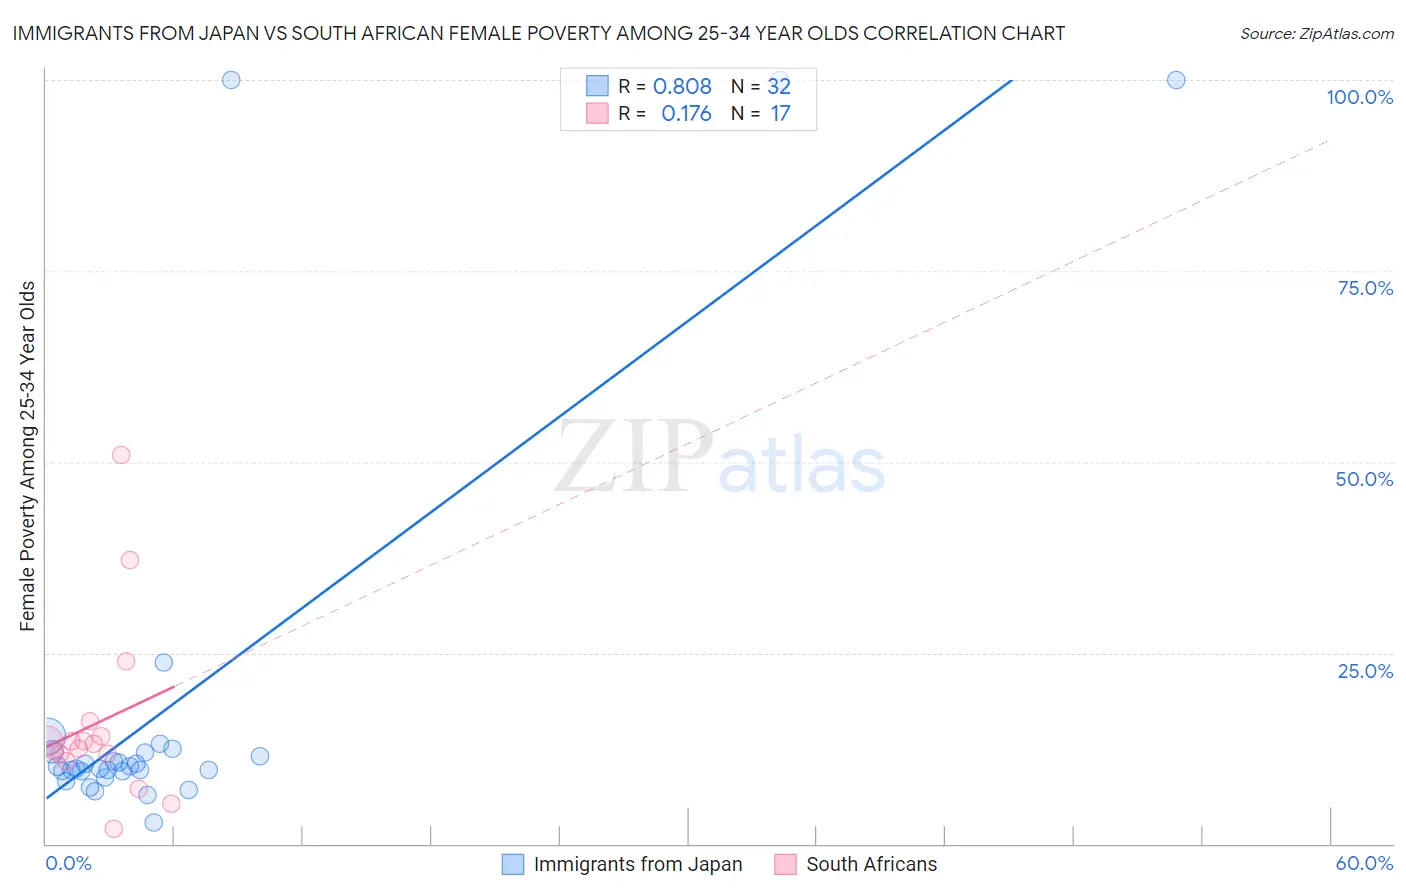 Immigrants from Japan vs South African Female Poverty Among 25-34 Year Olds